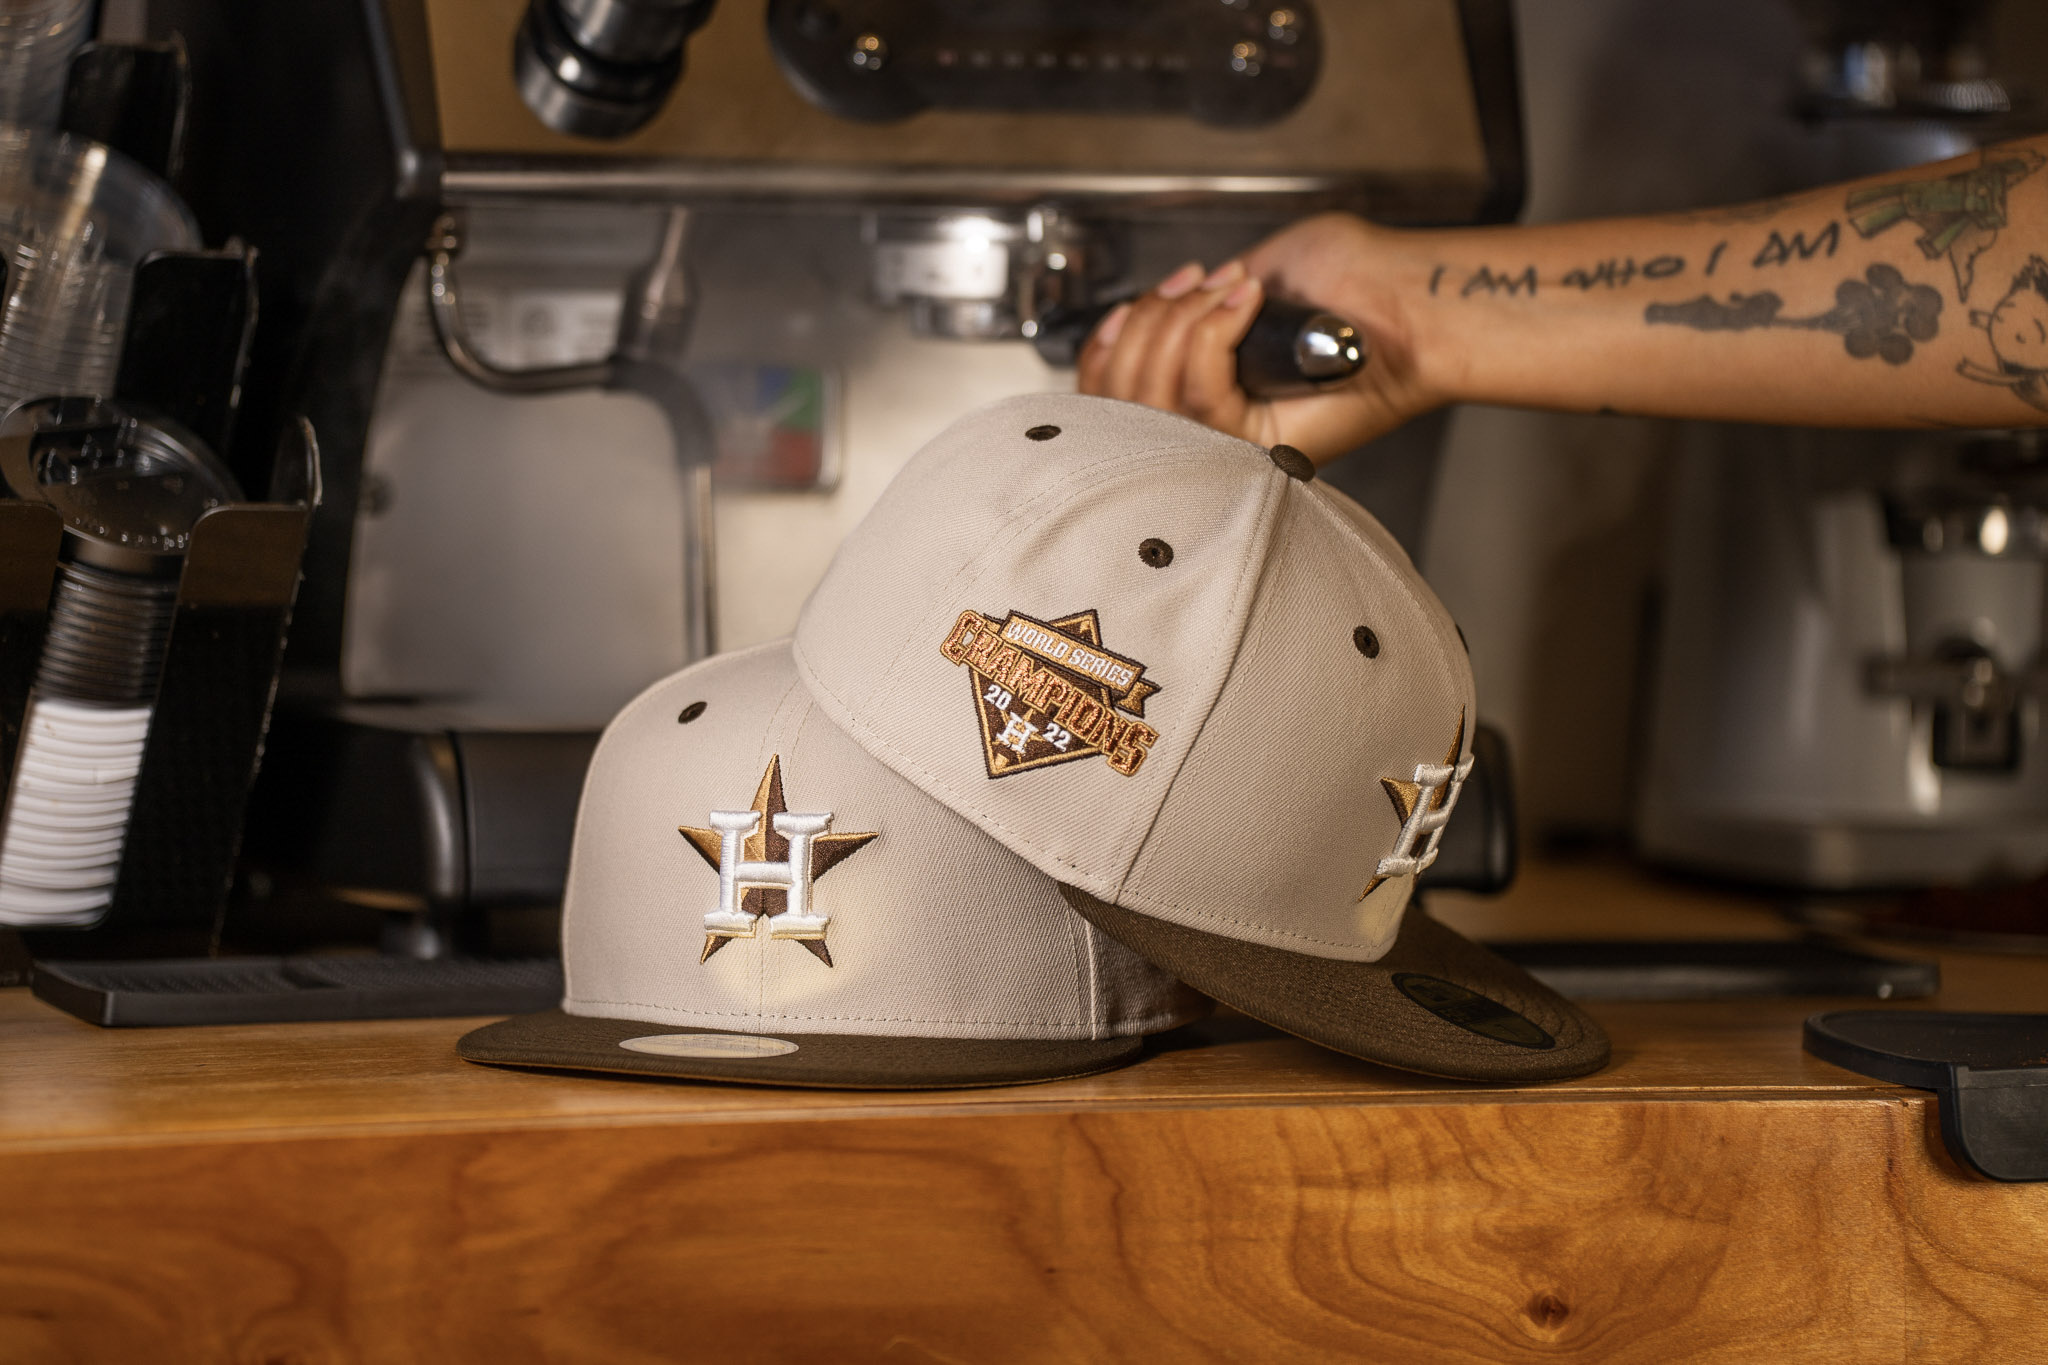 Buy New Era Tan Houston Astros Fitted Hat at in Style 8 3/8